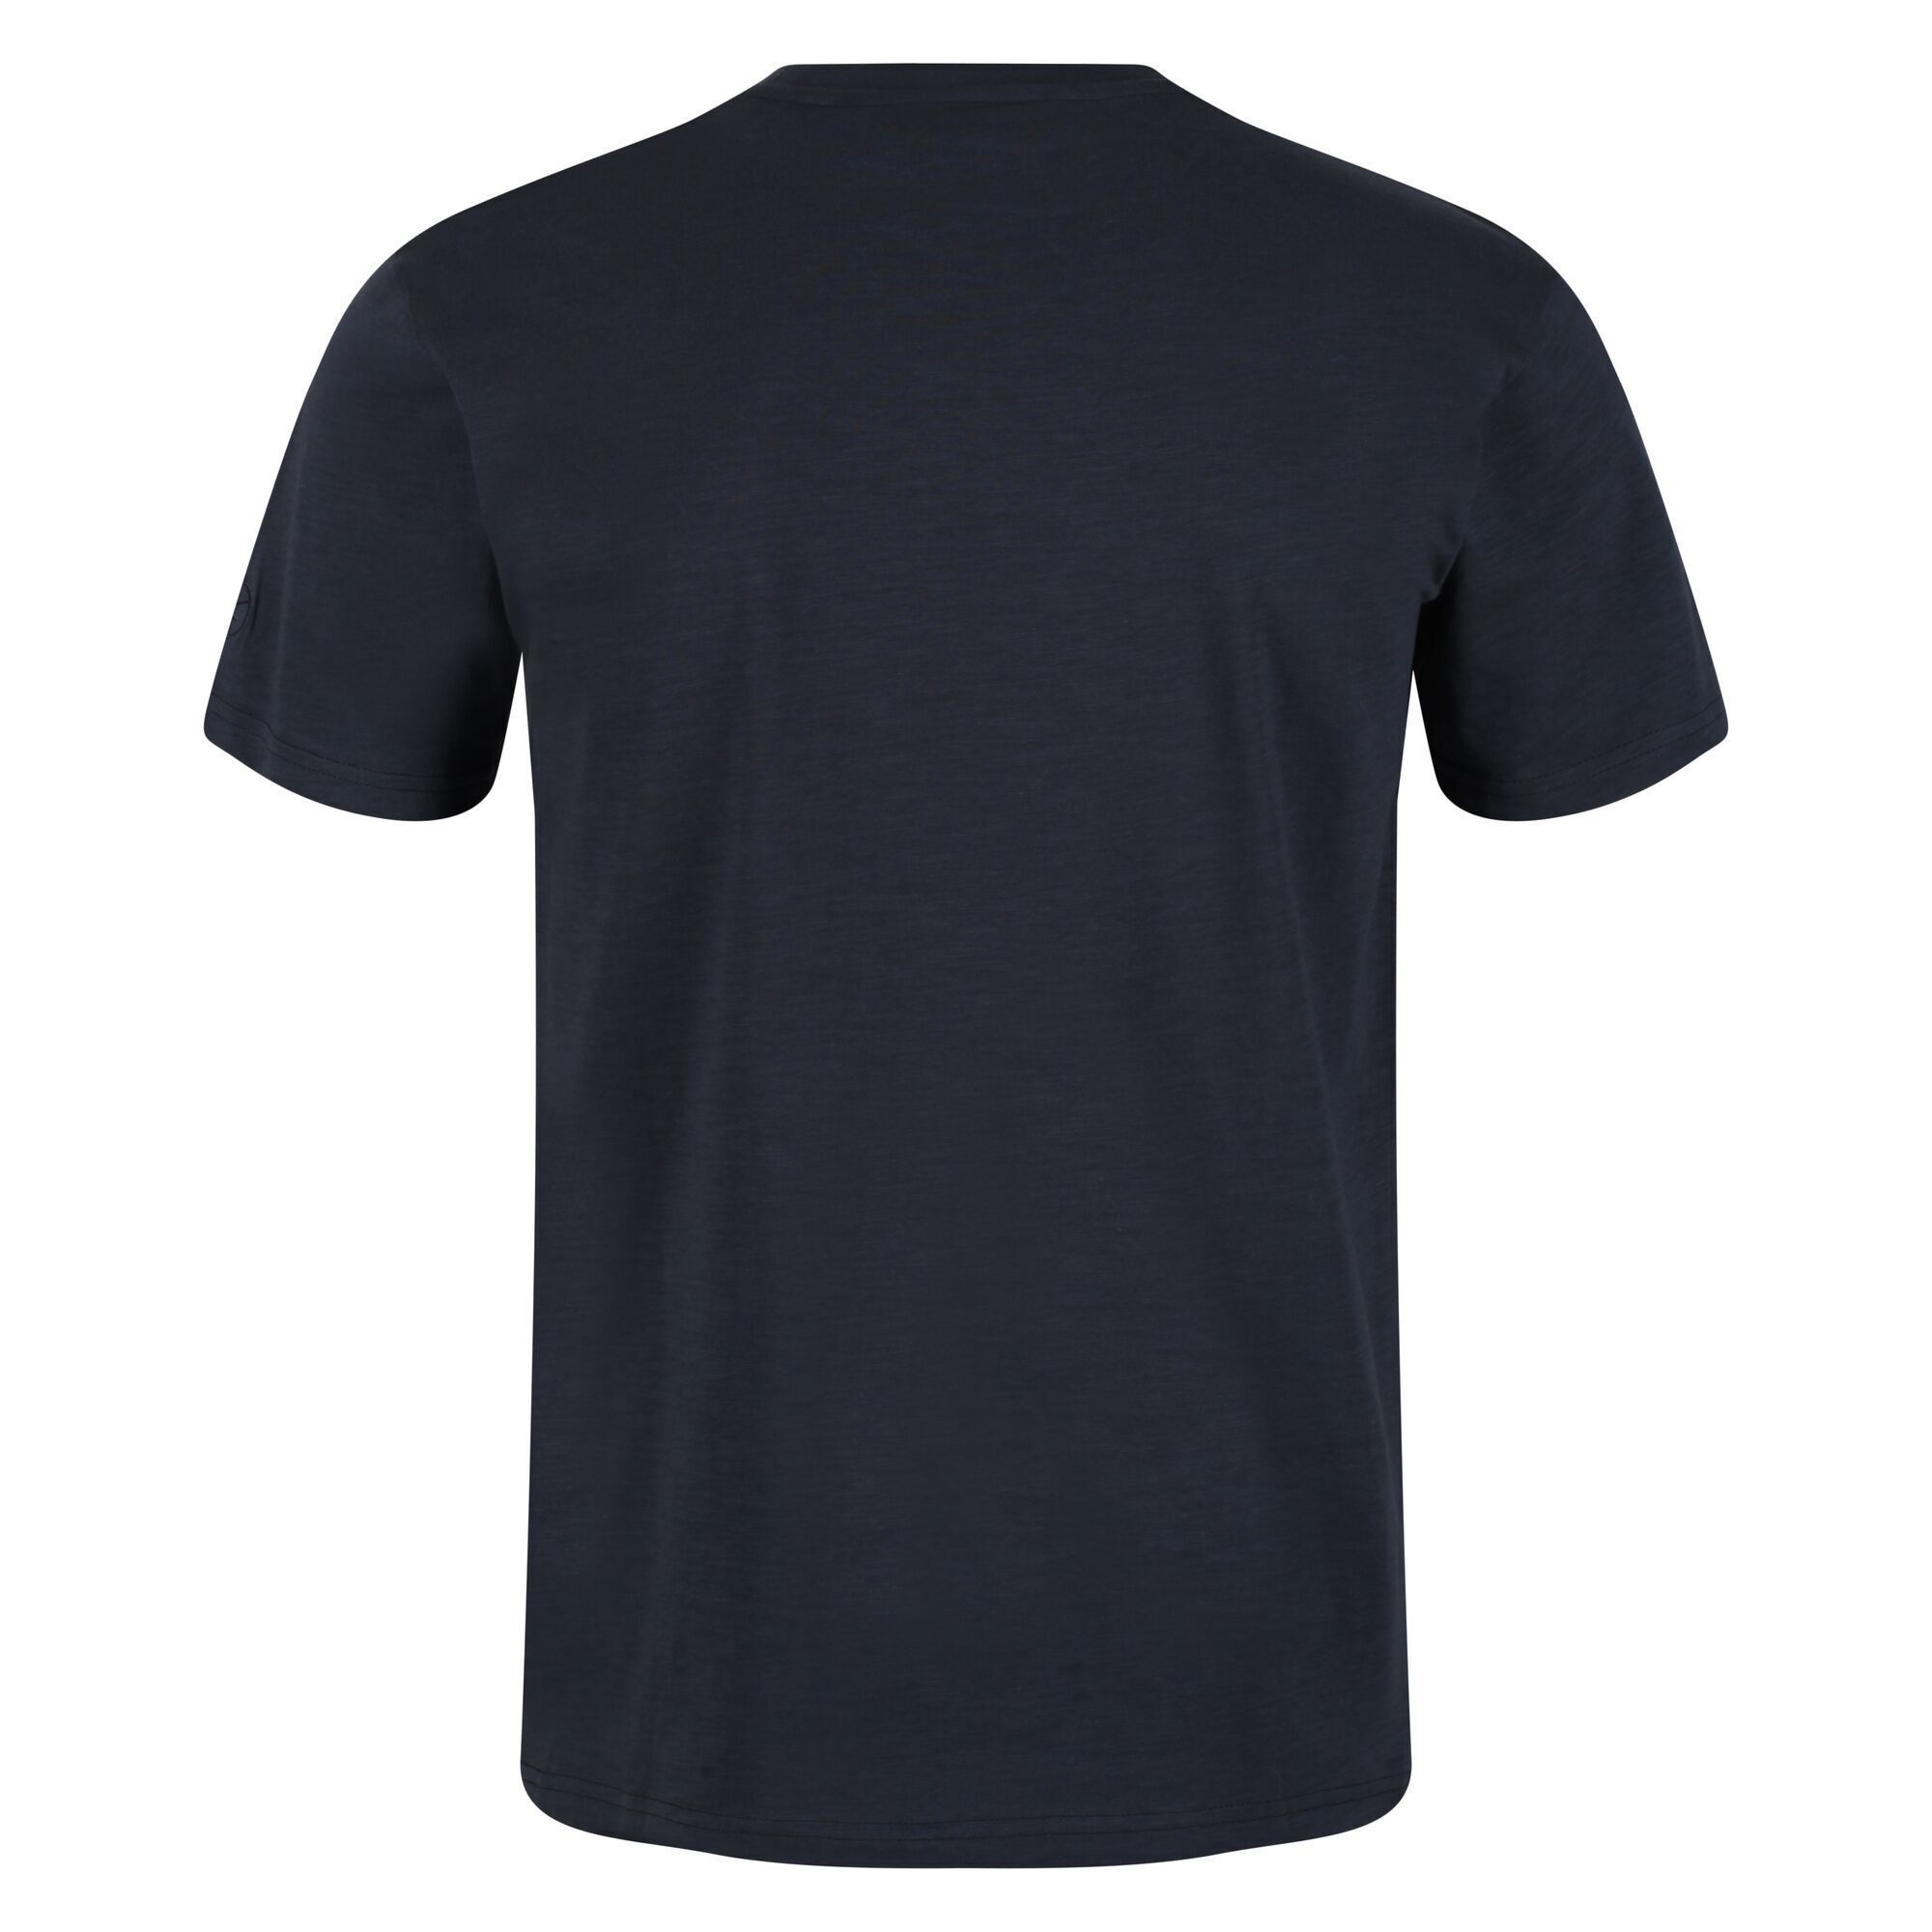 100% Cotton. Fabric: Coolweave, Slub, Soft Touch. Design: Plain. Pockets: 1 Chest Pocket. Neckline: Crew Neck. Sleeve-Type: Short-Sleeved. Fabric Technology: Breathable, Lightweight. Sustainable Materials.